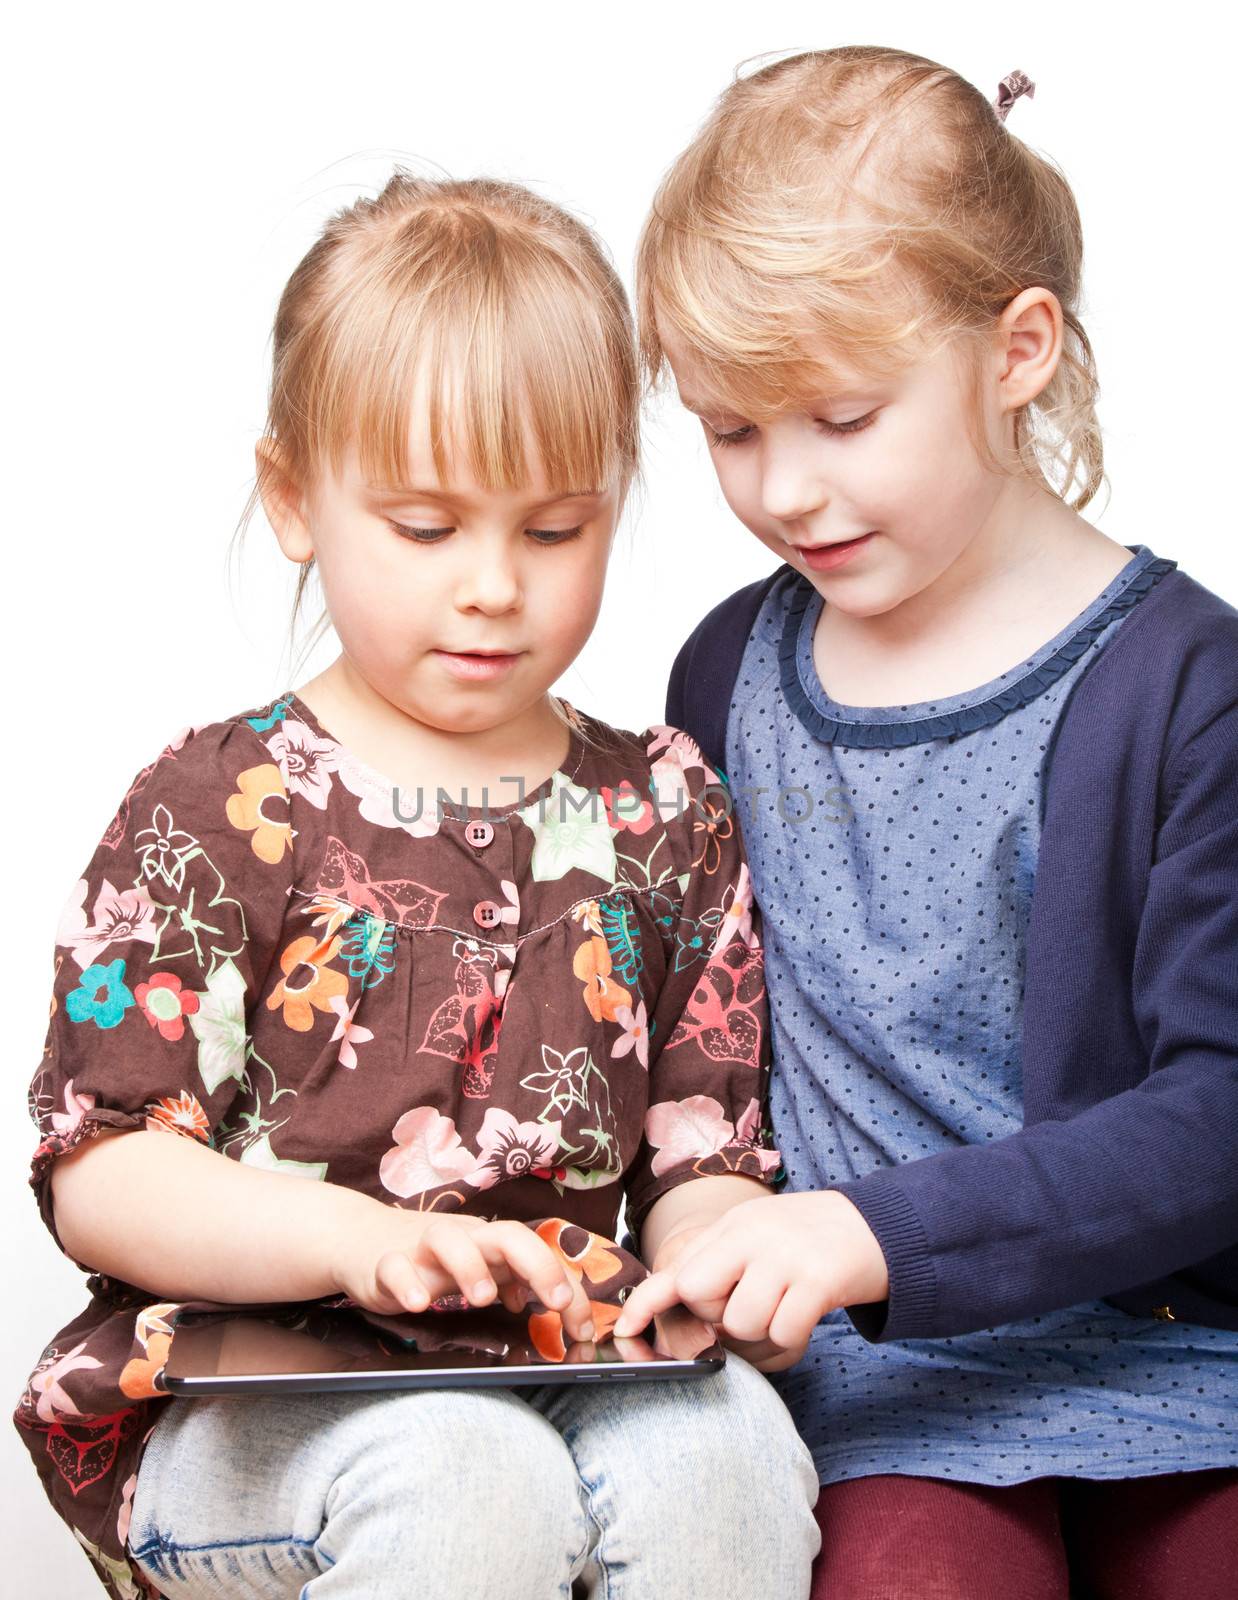 Girls playing with a tablet computer by naumoid